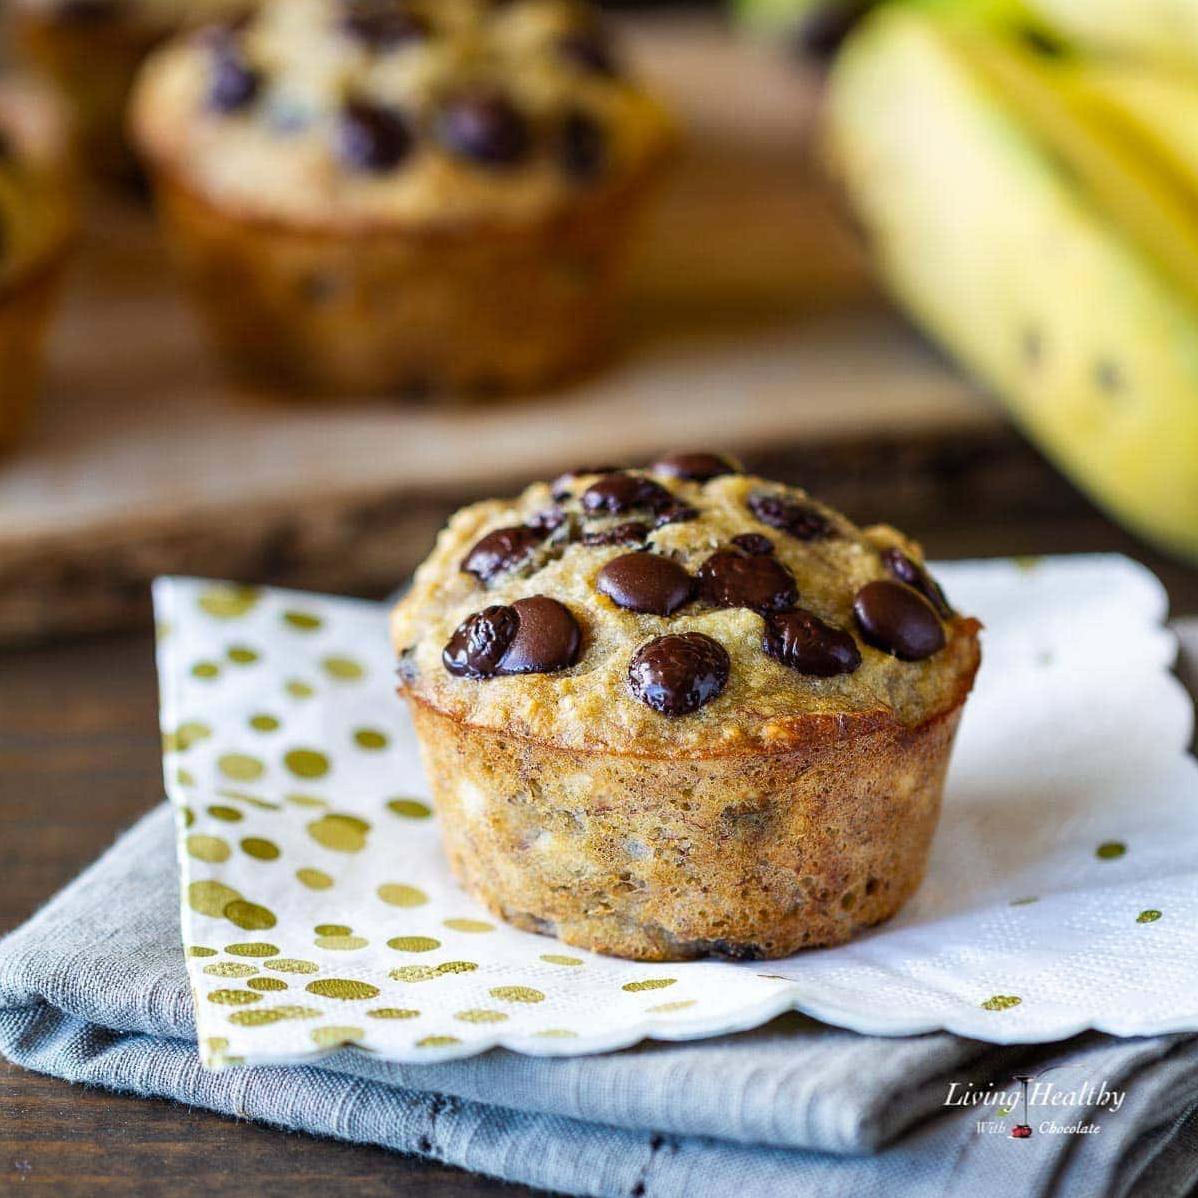  These muffins are gluten-free, dairy-free, and bursting with flavor.